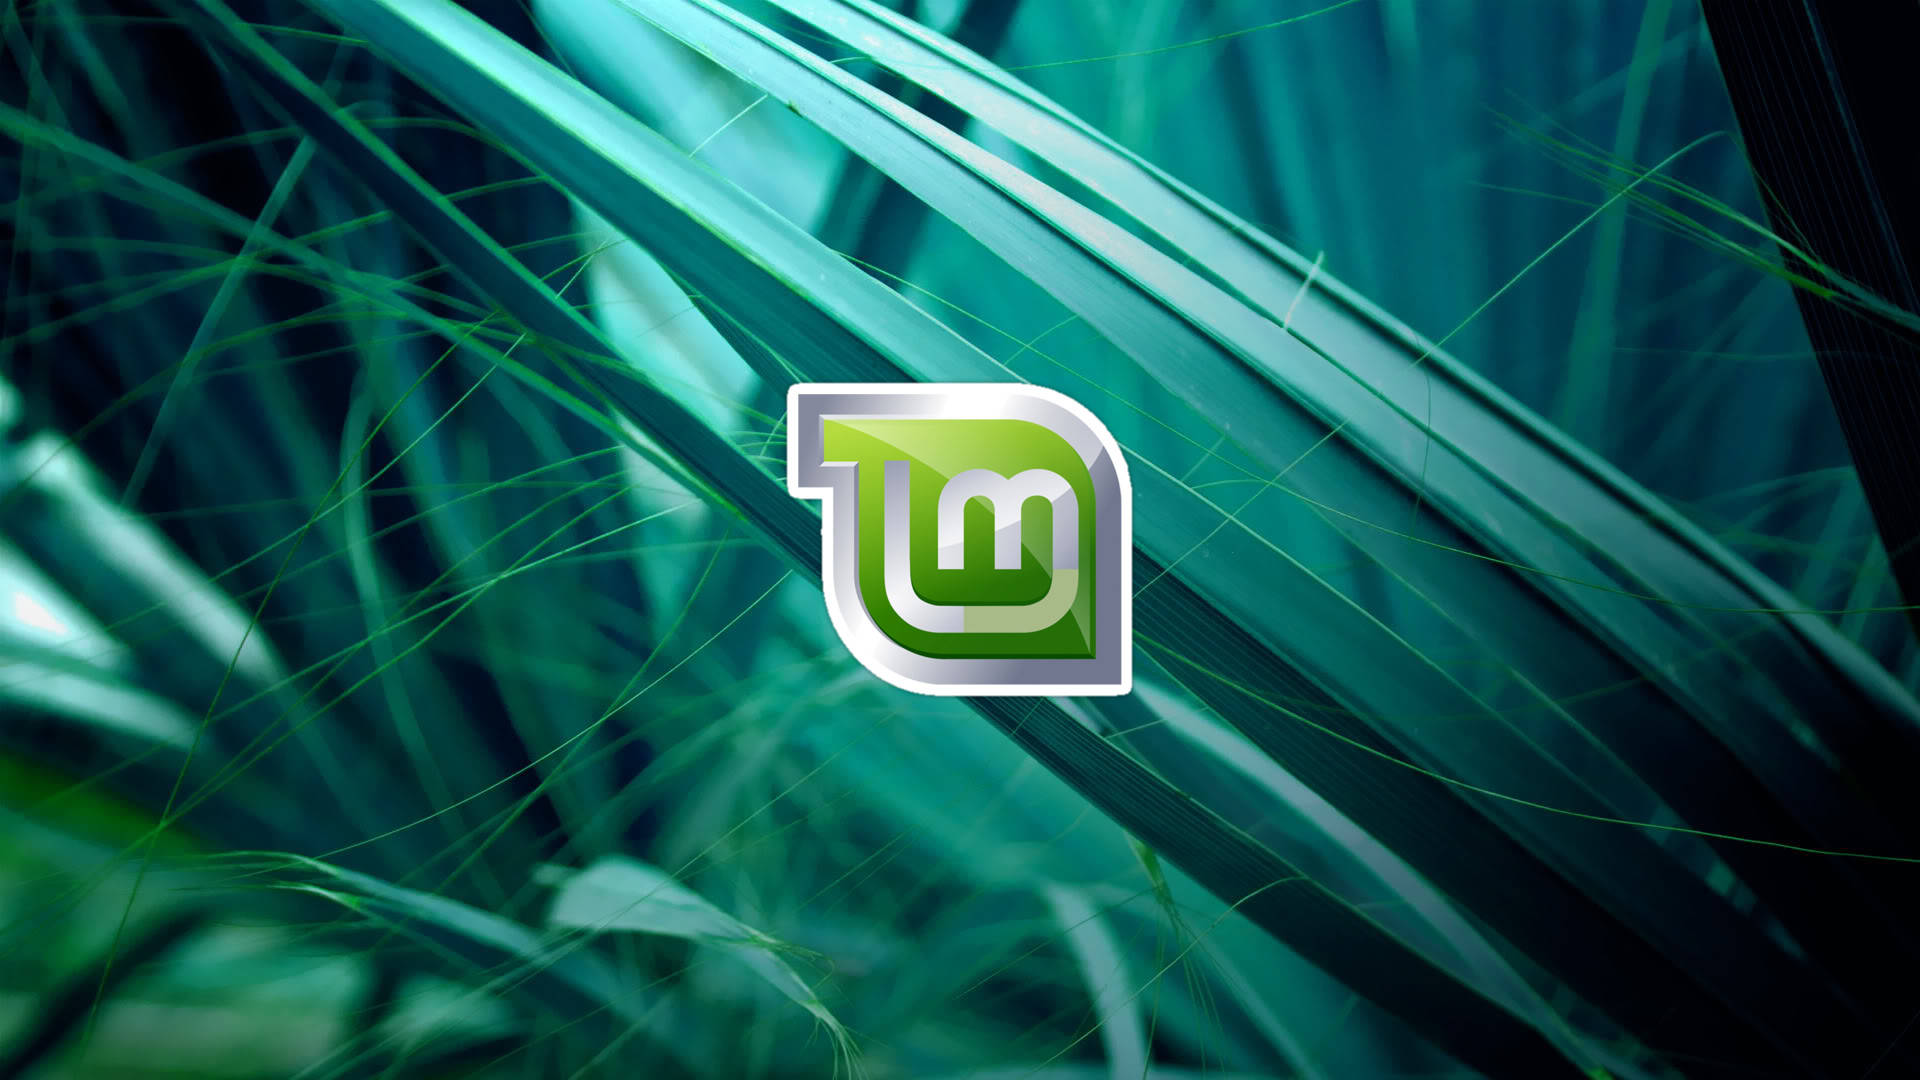 Operating System Linux Mint Logo On Plant Leaves